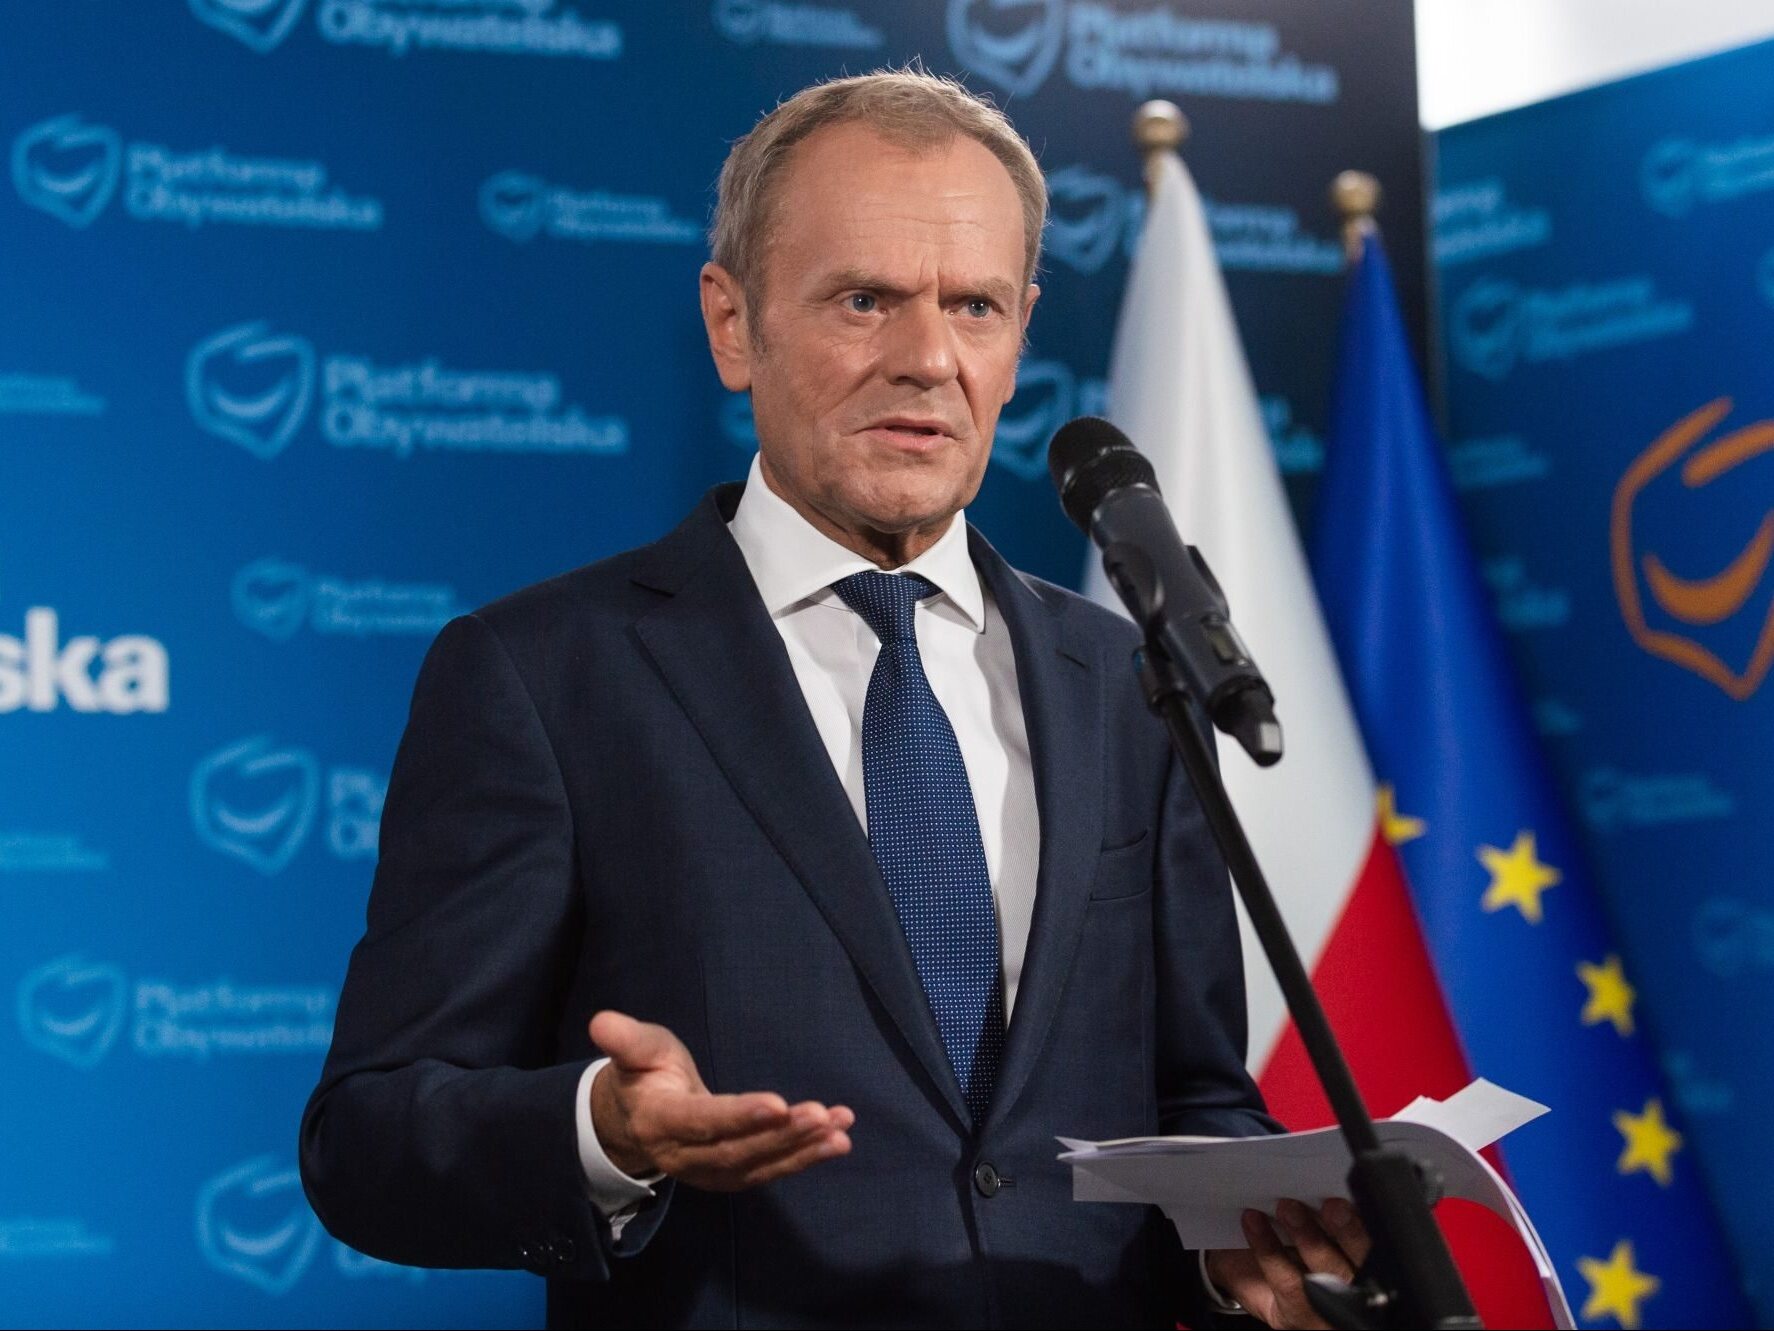 Tusk on the "poison of the 21st century". "Only one message: you have to get them"